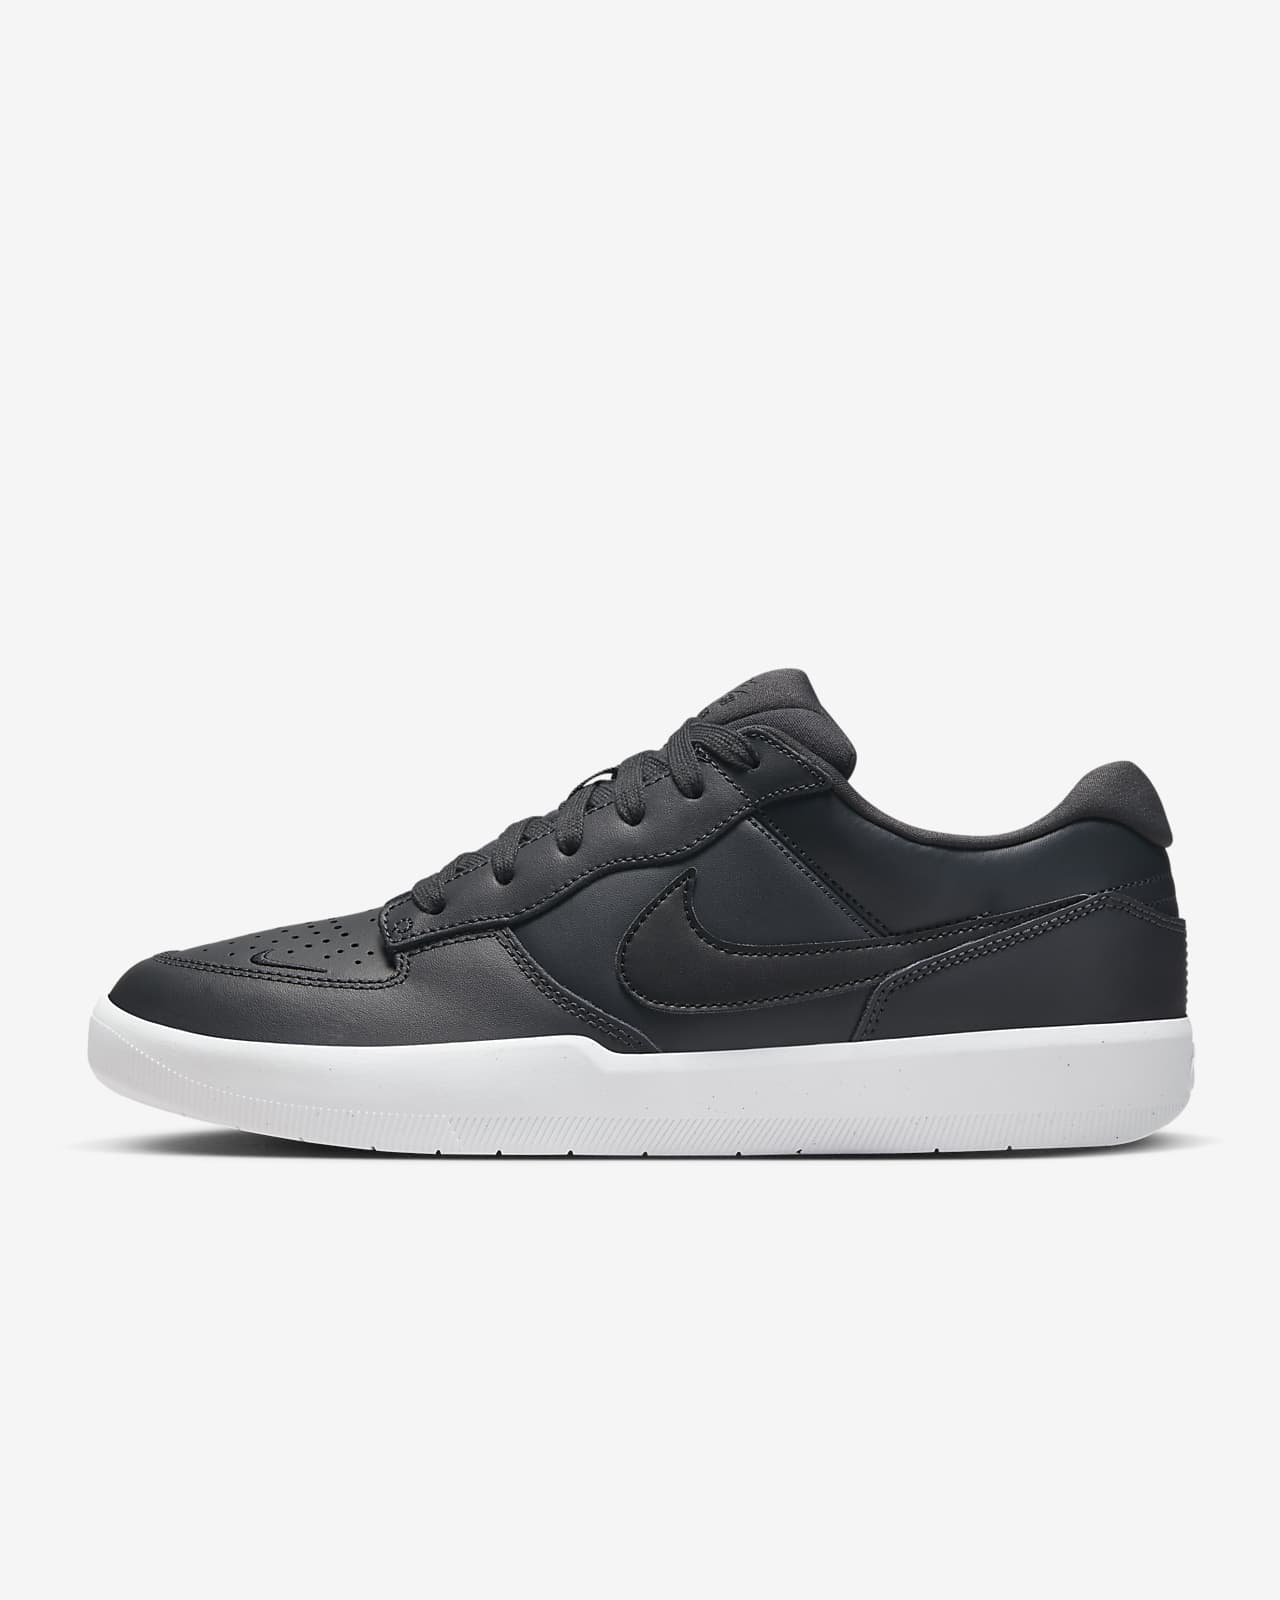 Conflicto Sin personal Cambiarse de ropa Nike SB Force 58 Premium Skate Shoes. Nike.com